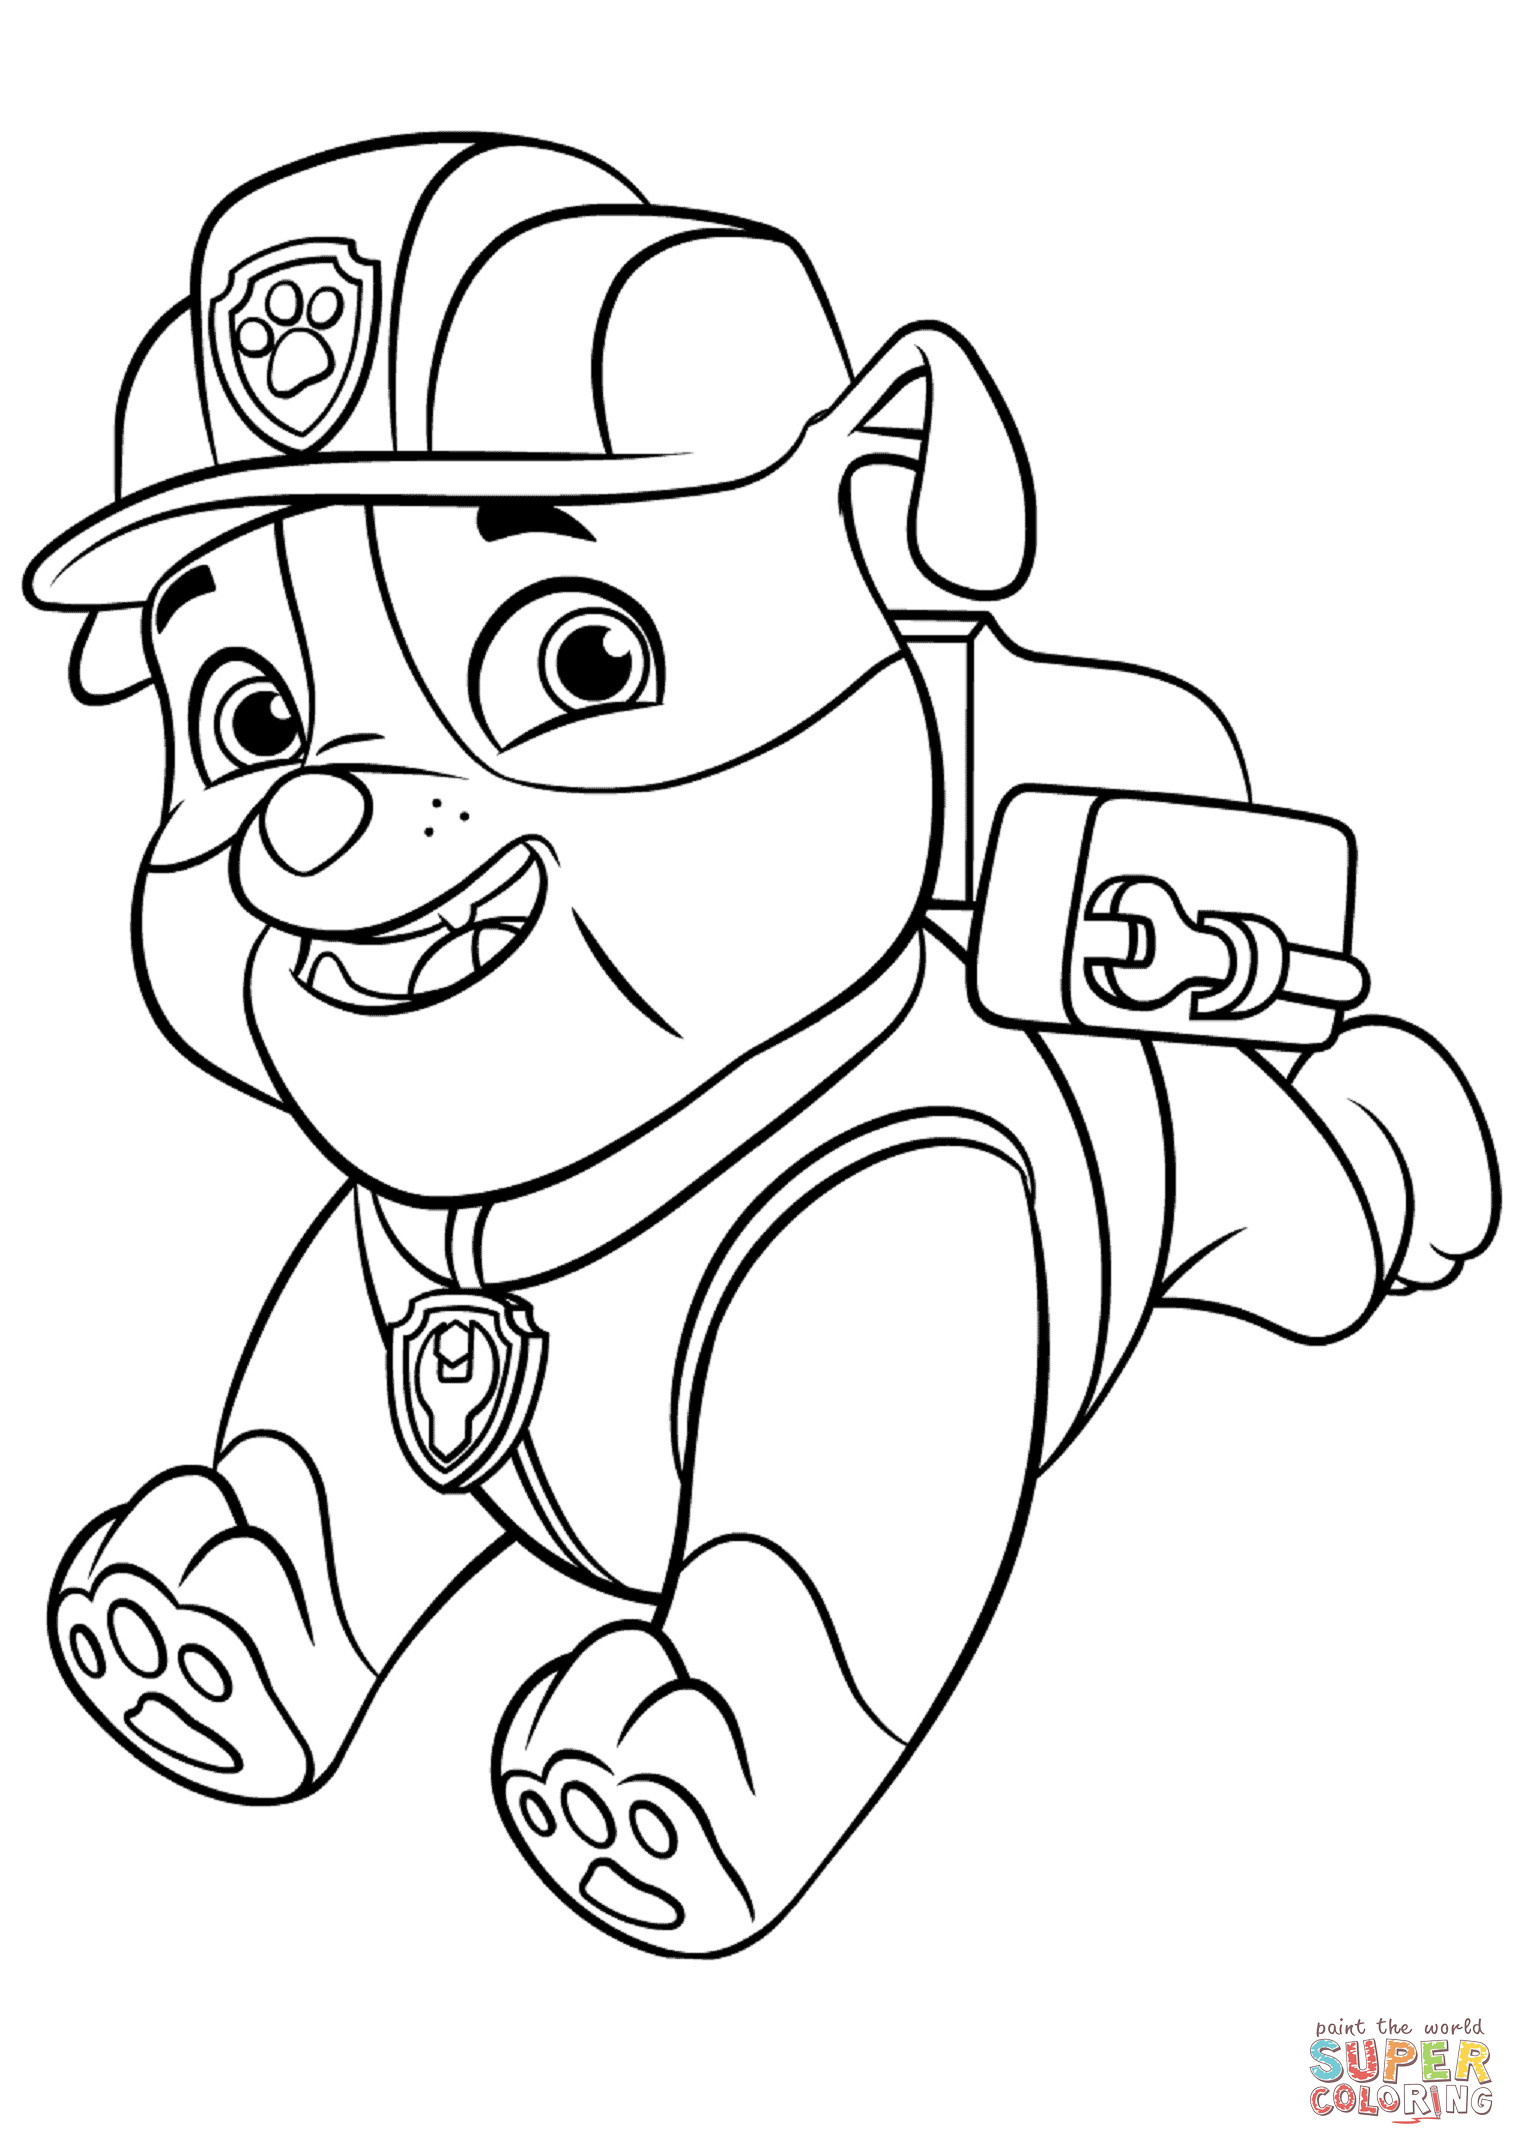 Coloring Pages For Kids Paw Patrol
 Paw Patrol Rubble with Backpack